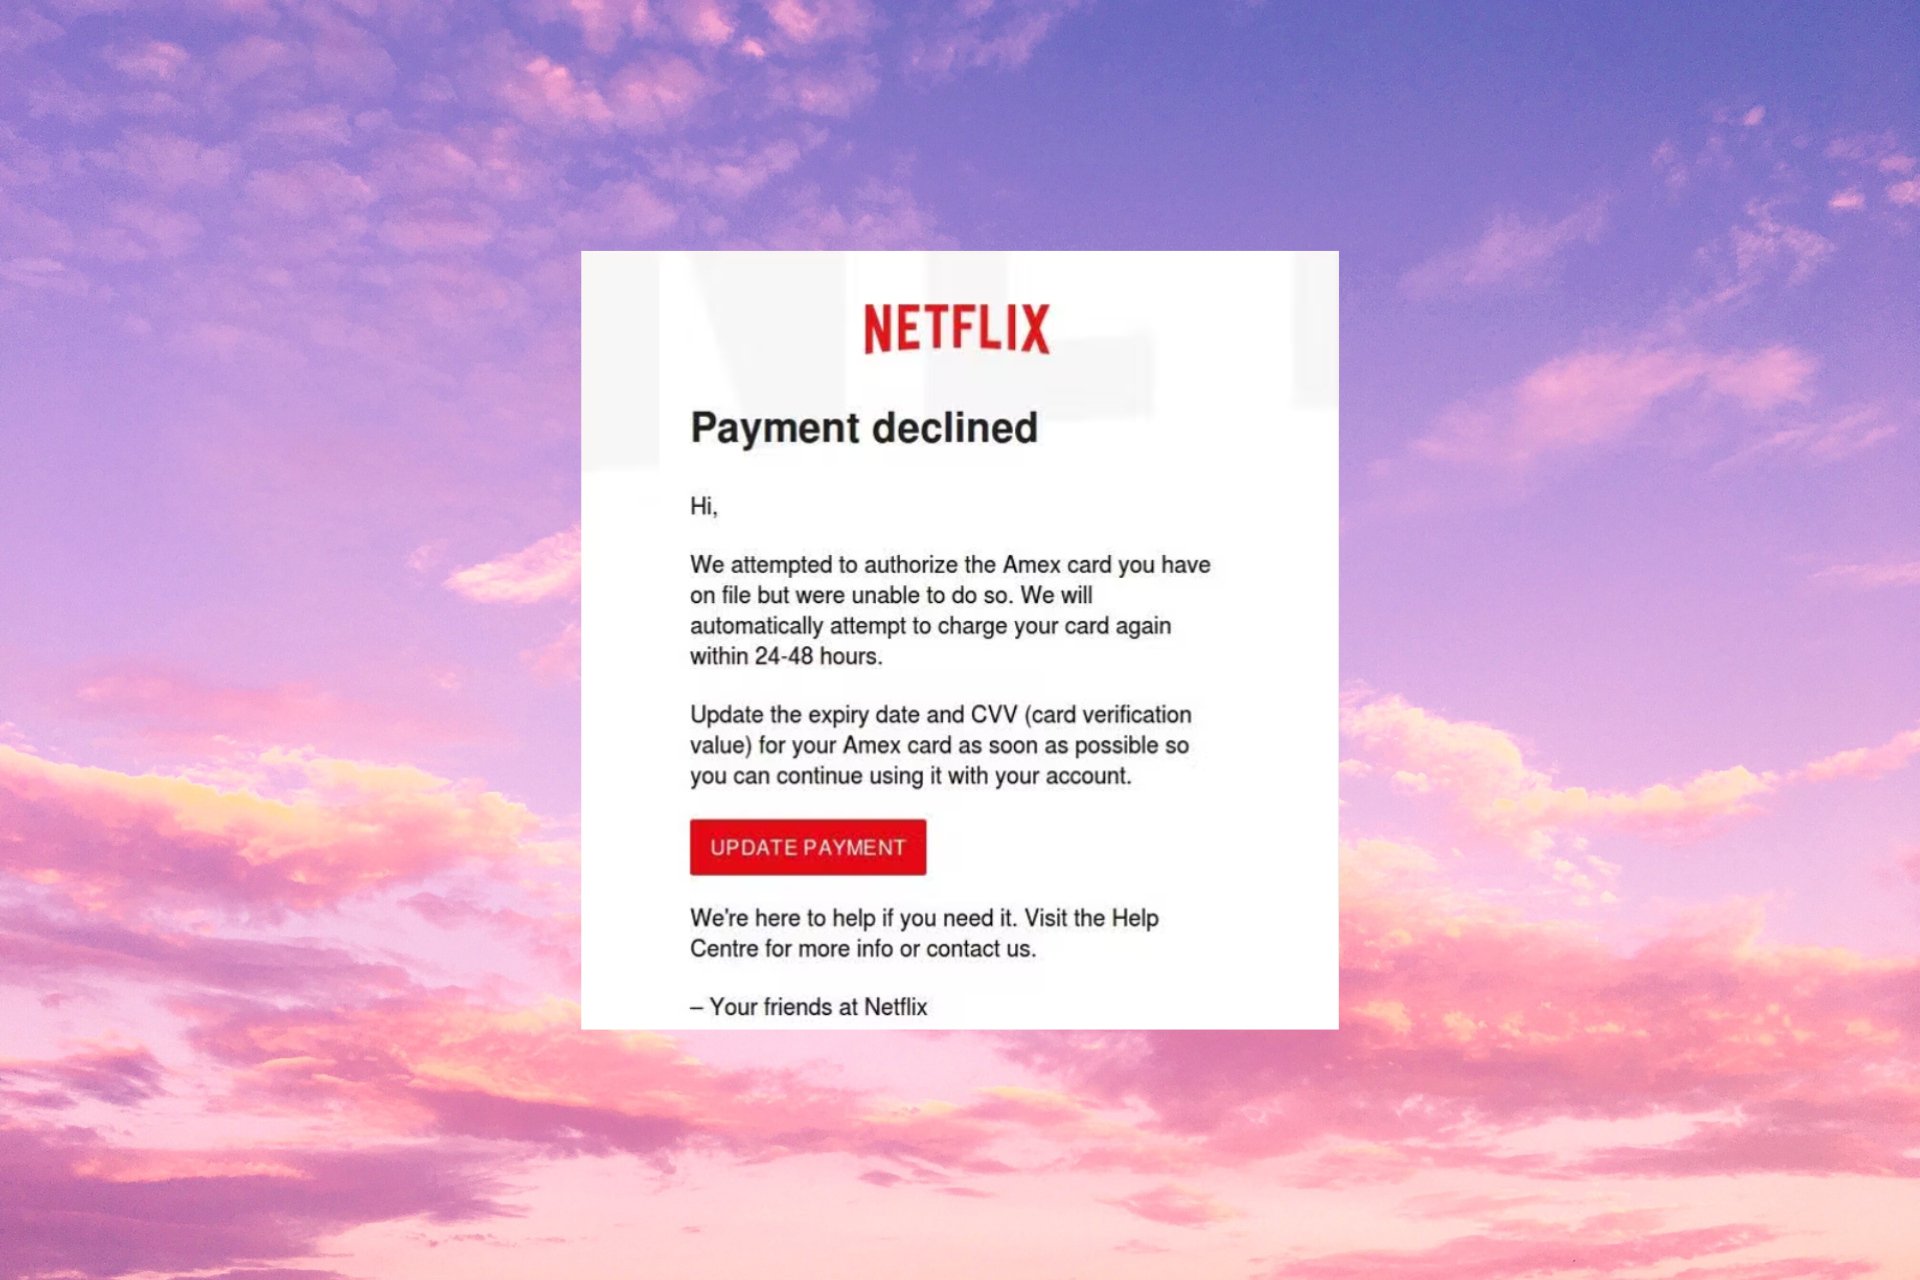 How to get rid of Netflix Payment Declined